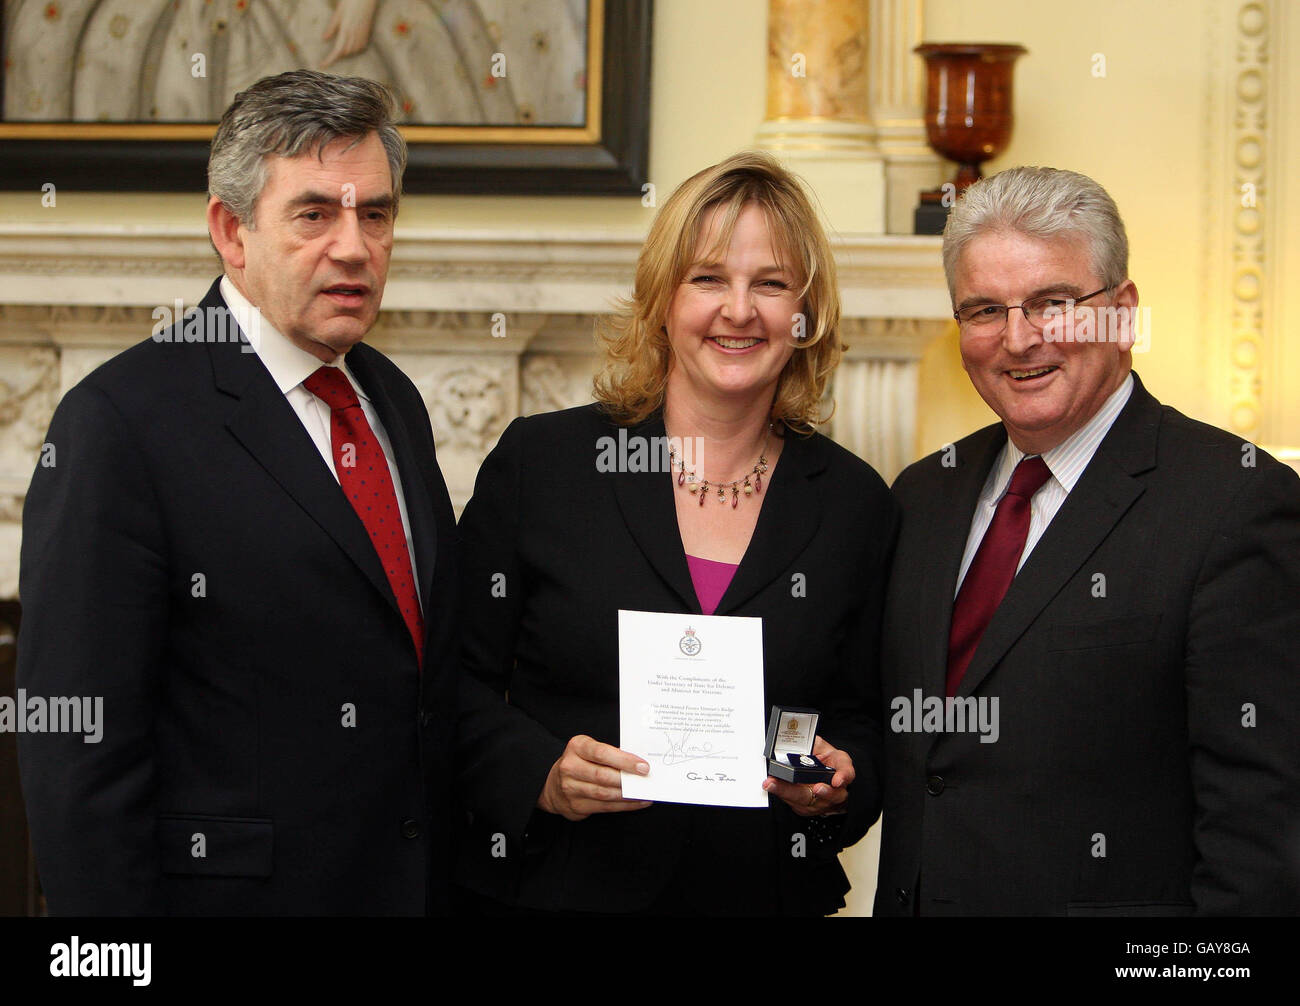 Prime Minister Gordon Brown and Defence Secretary Des Browne present a Veterans Award to Erica Ferguson, Royal Air Force, at a Downing Street reception ahead of Veterans Day on June 27th. Stock Photo